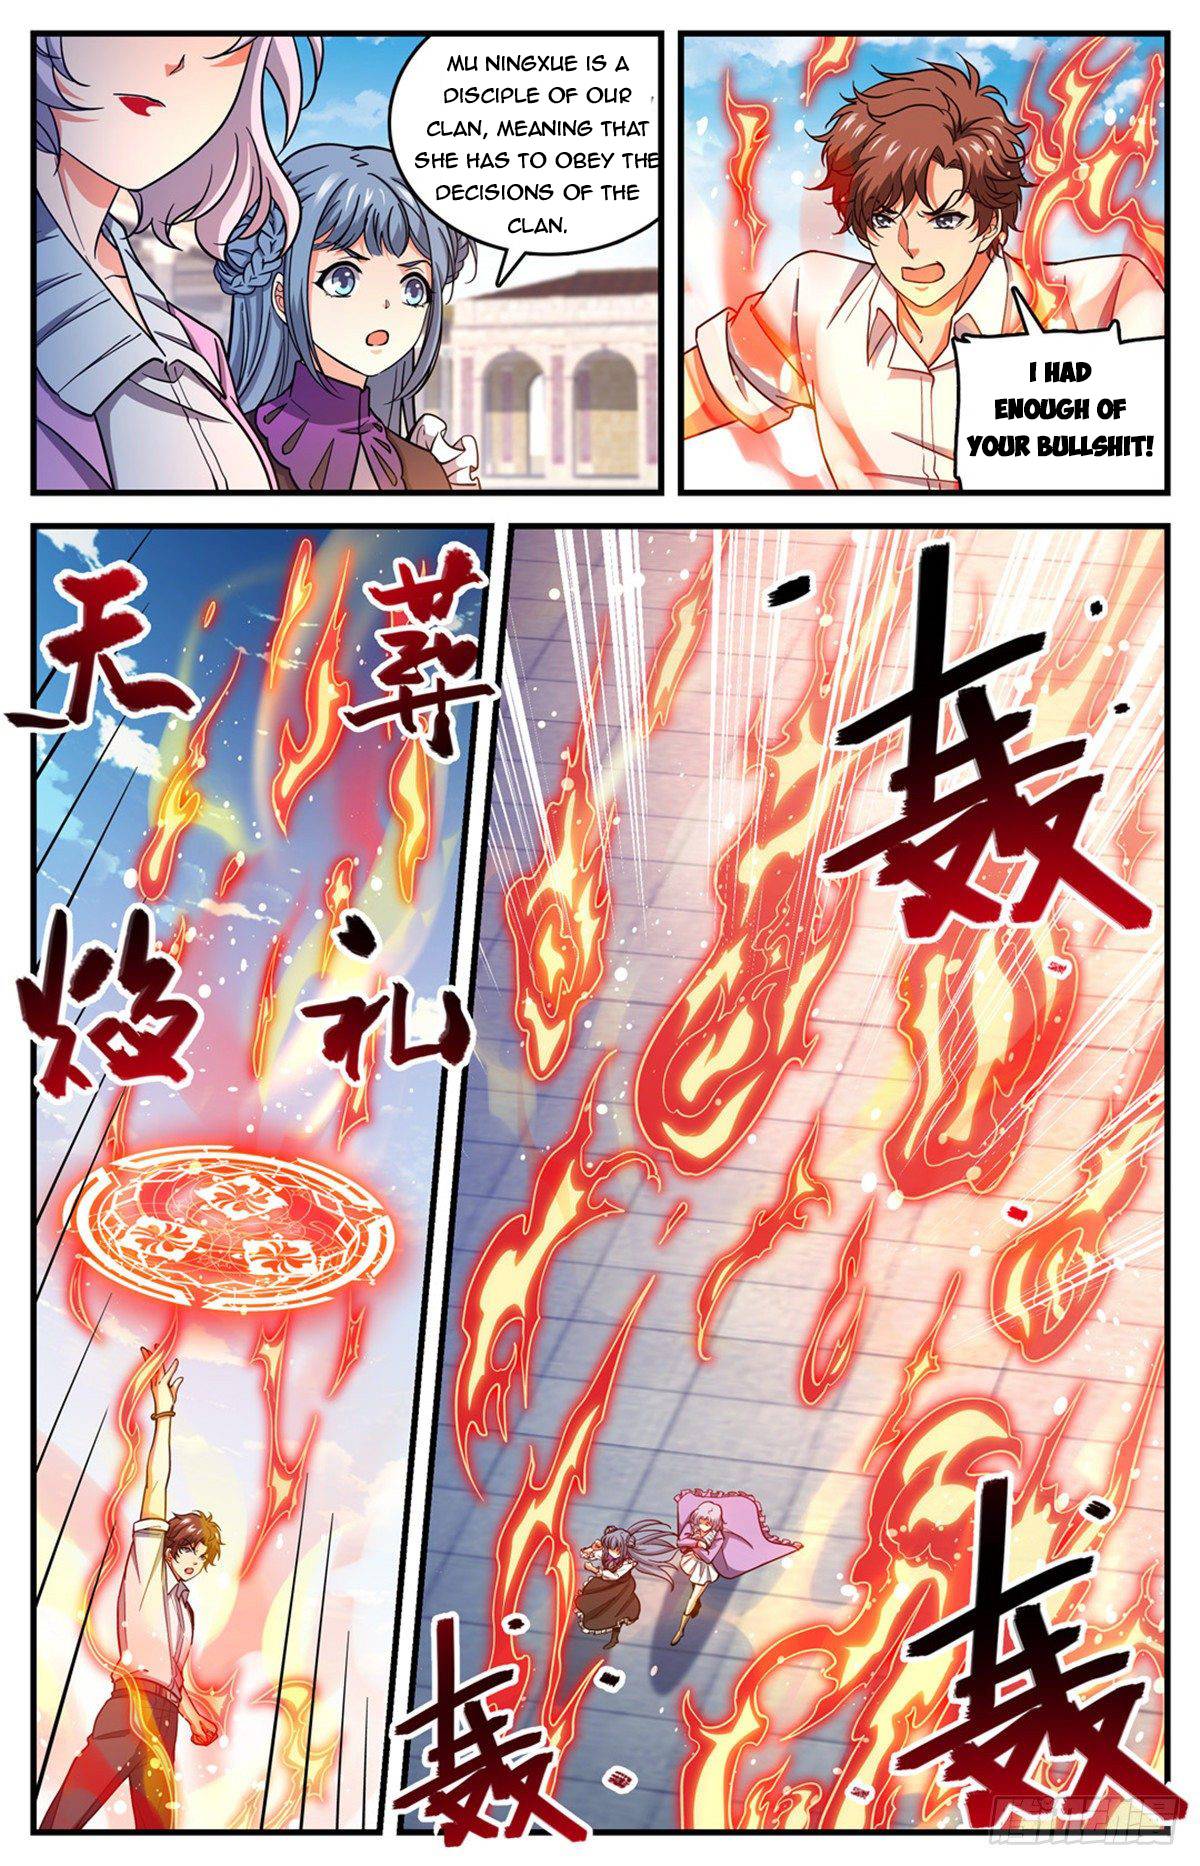 Versatile Mage, Chapter 679 - chapter 679 image 10